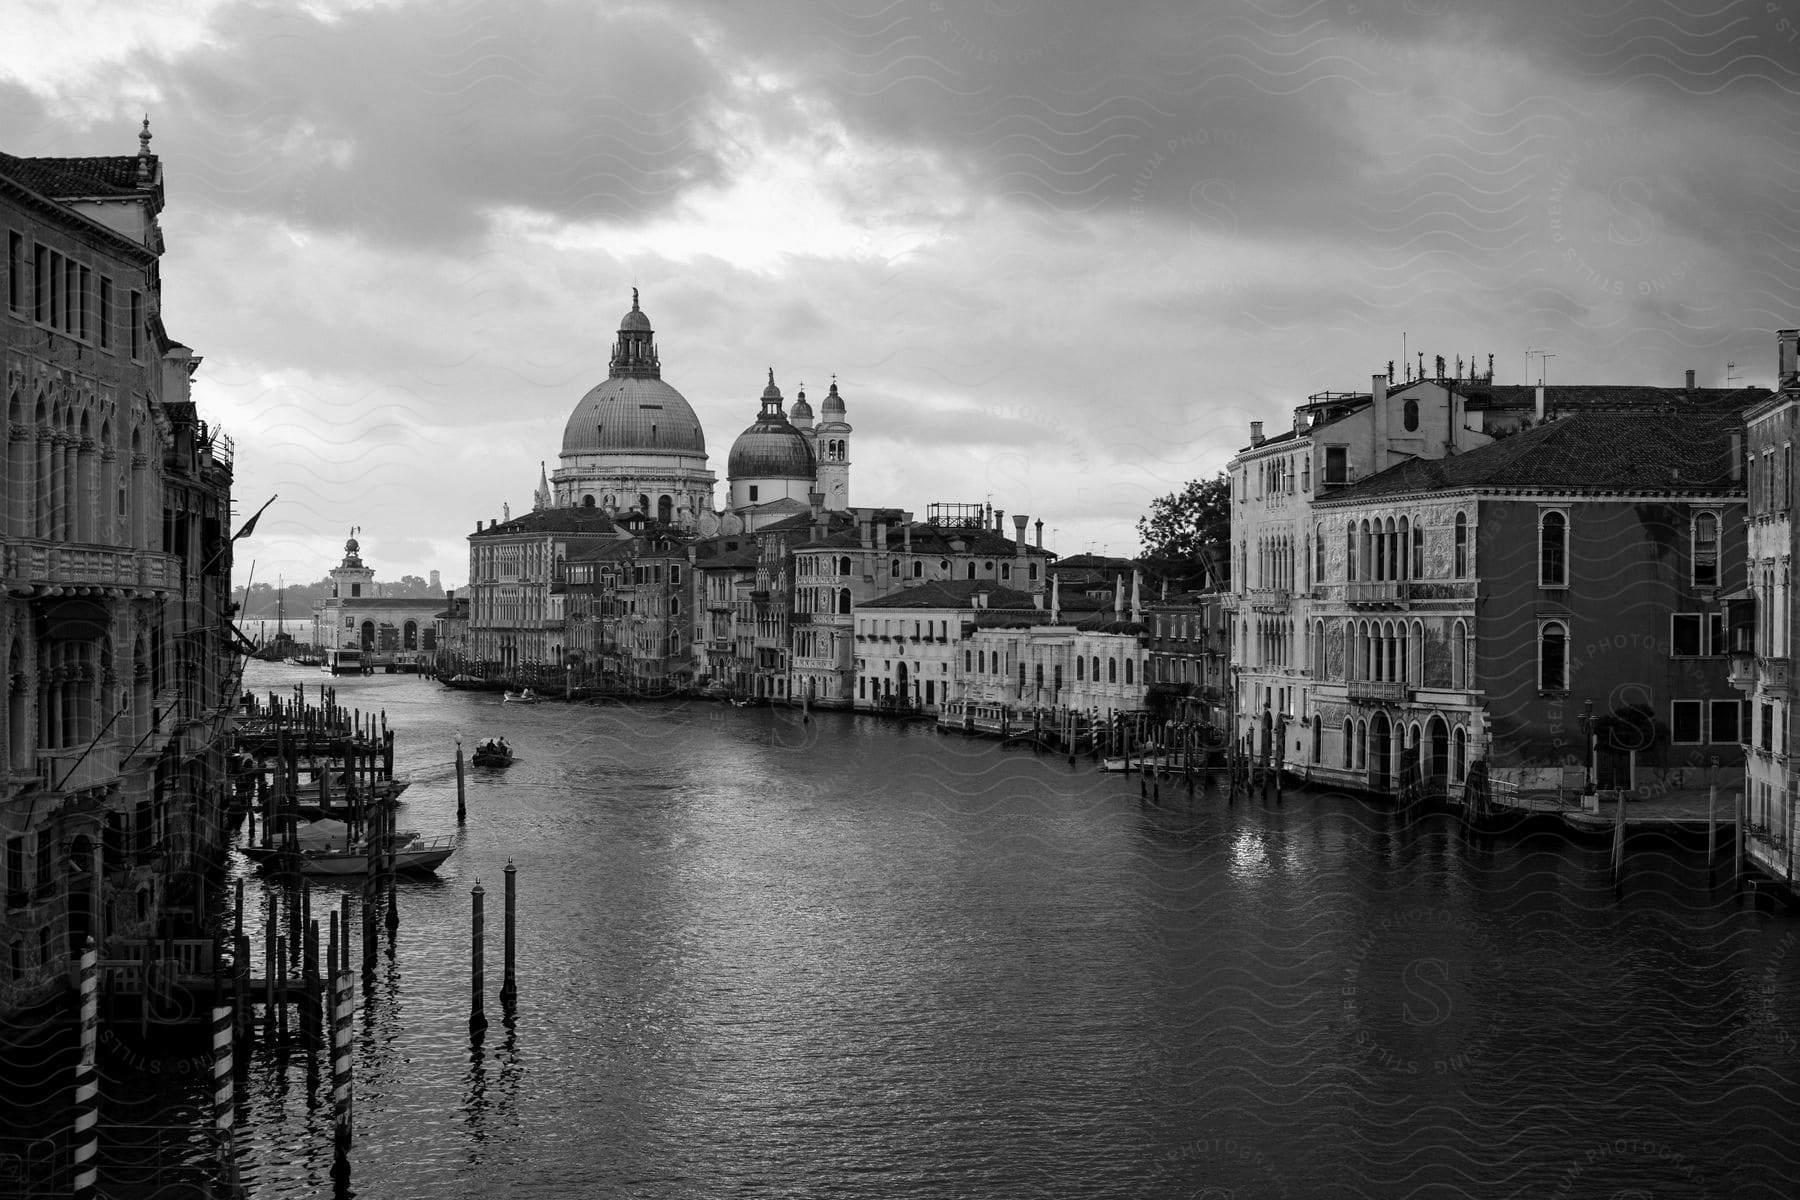 Black and white photo of the canals in venice italy on a cloudy day with little activity on the water